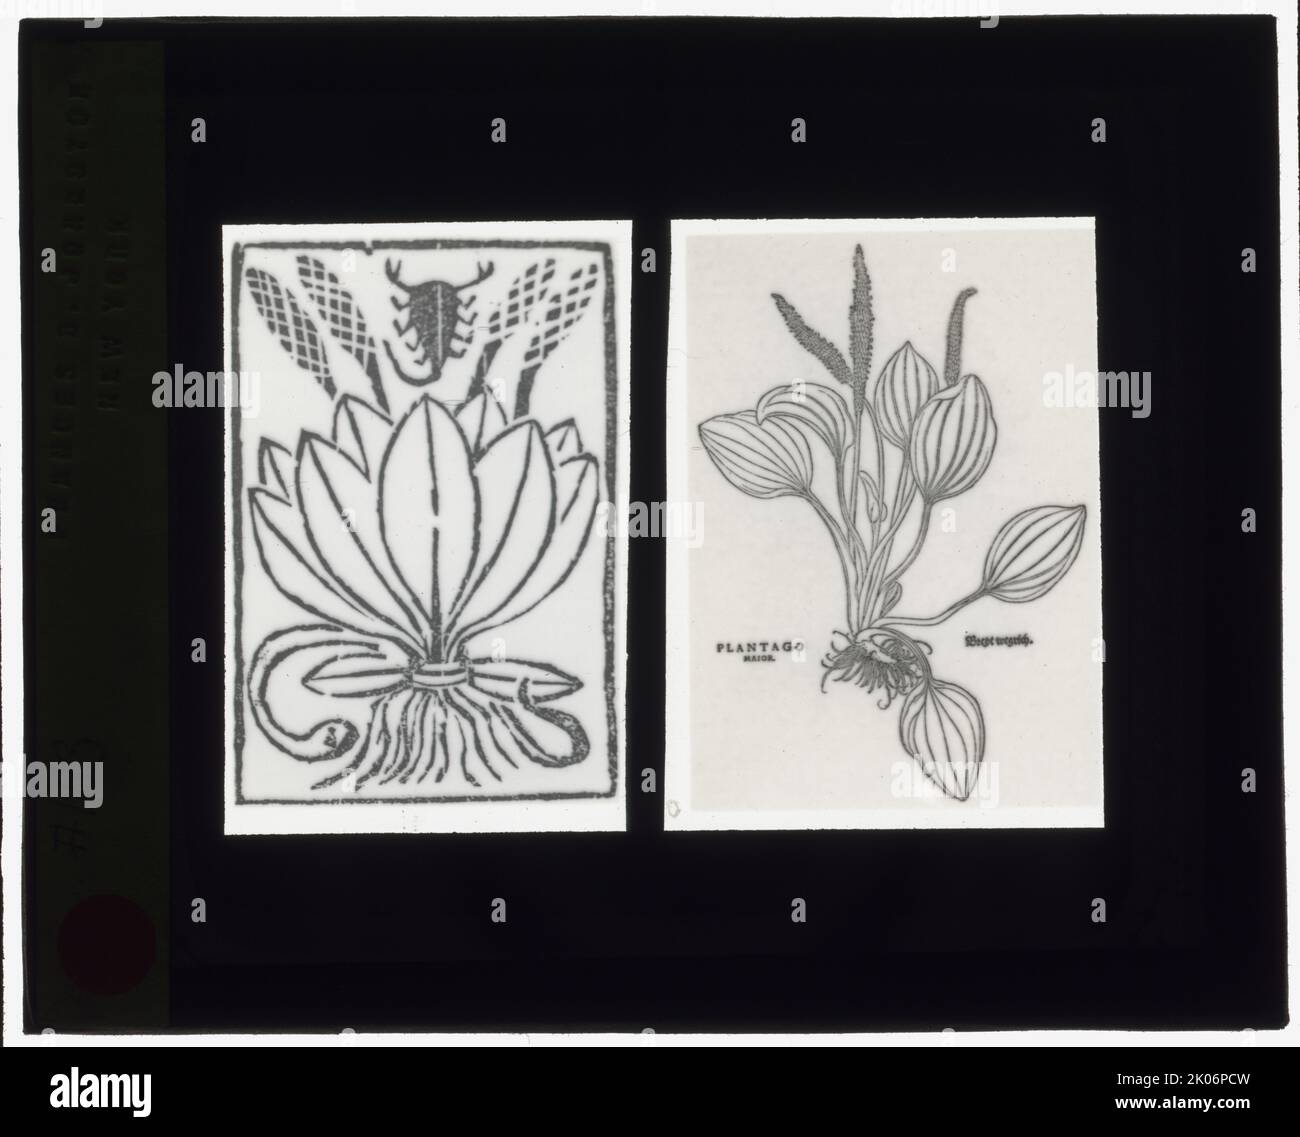 Reproduction of print showing Plantago plant, between 1915 and 1925. Photograph of a (left) woodcut, from &quot;Gart der Gesundheit&quot;, 1485; (right) woodcut, from Leonard Fuchs, &quot;De historia stirpium&quot;, Basel, 1542. Stock Photo